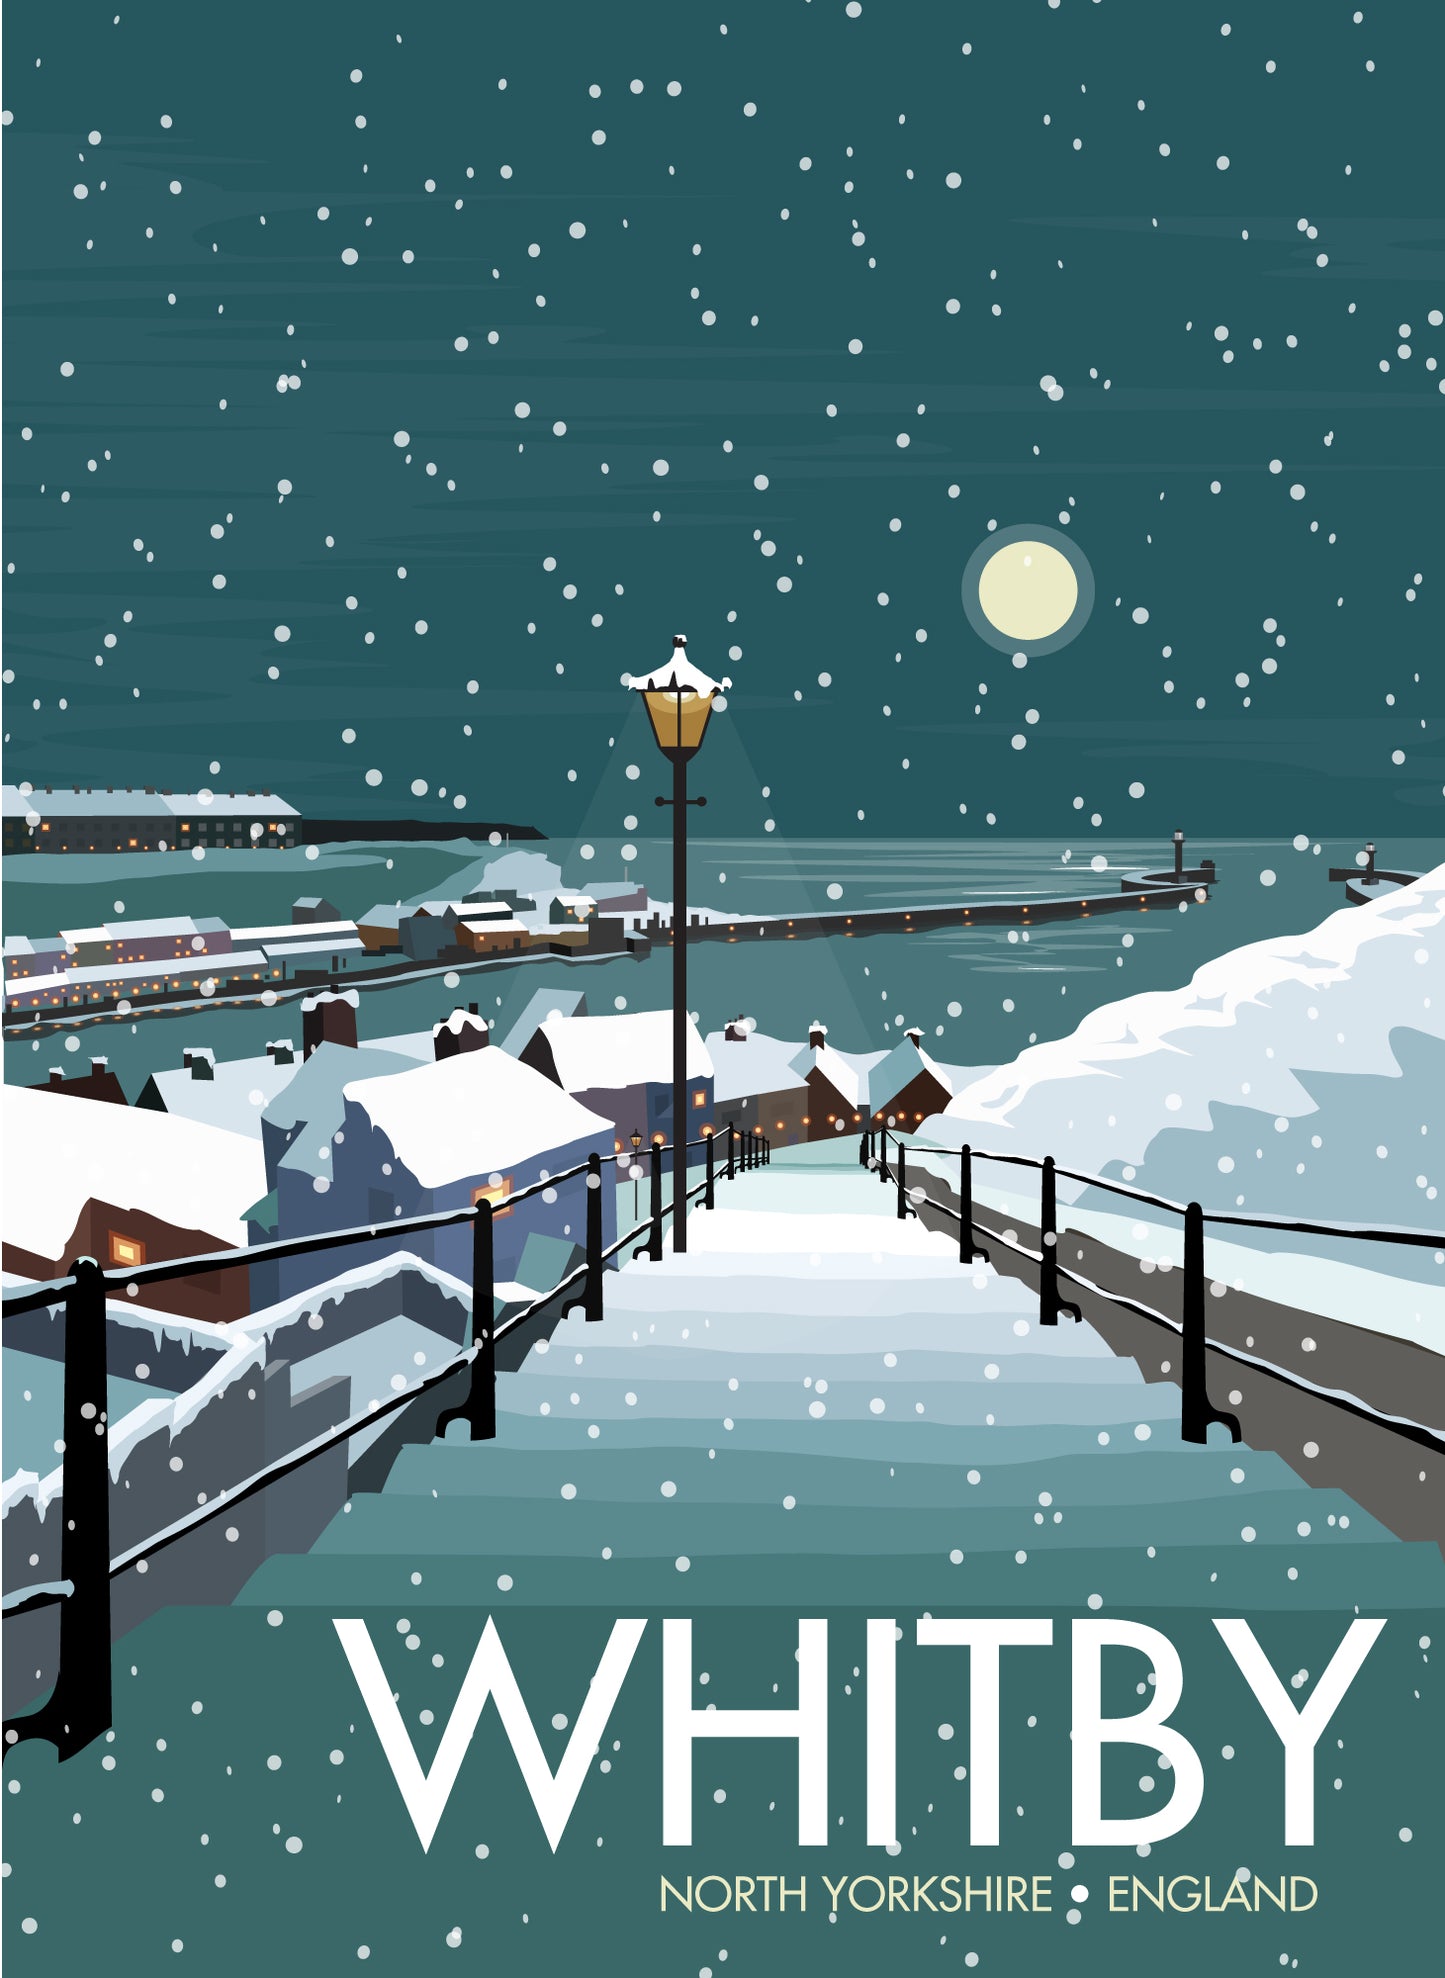 Whitby Snow Travel Poster